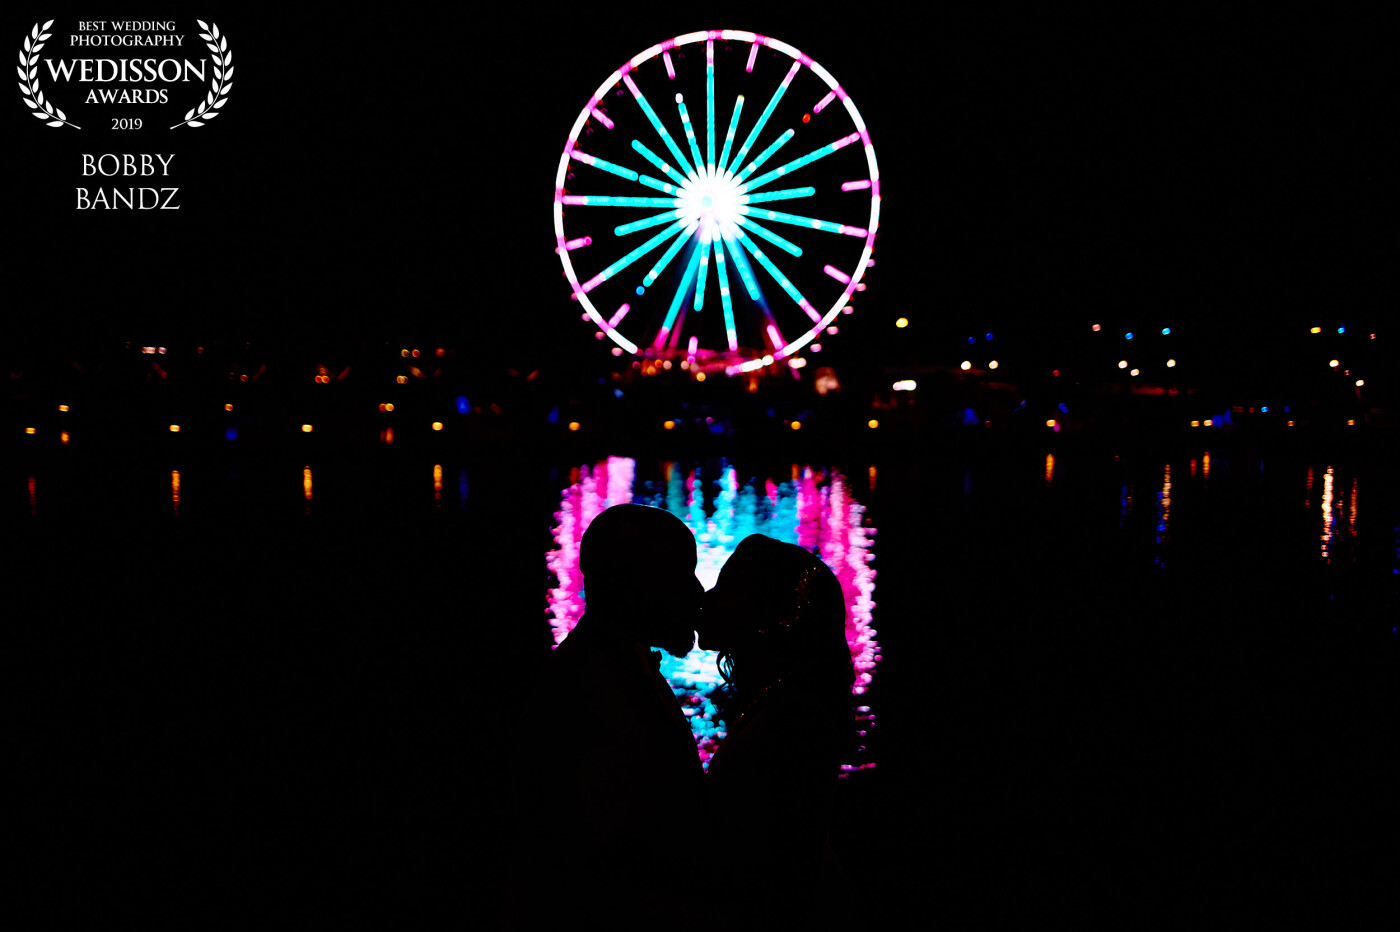 Last shot of the night and we ended up at National Harbor to finish it off. There are a bunch of cliche shots that are done here but I wanted to think outside the box and use the reflection of the iconic Ferris wheel as my focal point to draw the viewer's eye to my couple. Lucky for me even though it was a long night already the bride and groom gave me free rein to do what I felt like would look best and this is what I came up with! I think it was one of their favorite shots from the day and for me, that means the world!